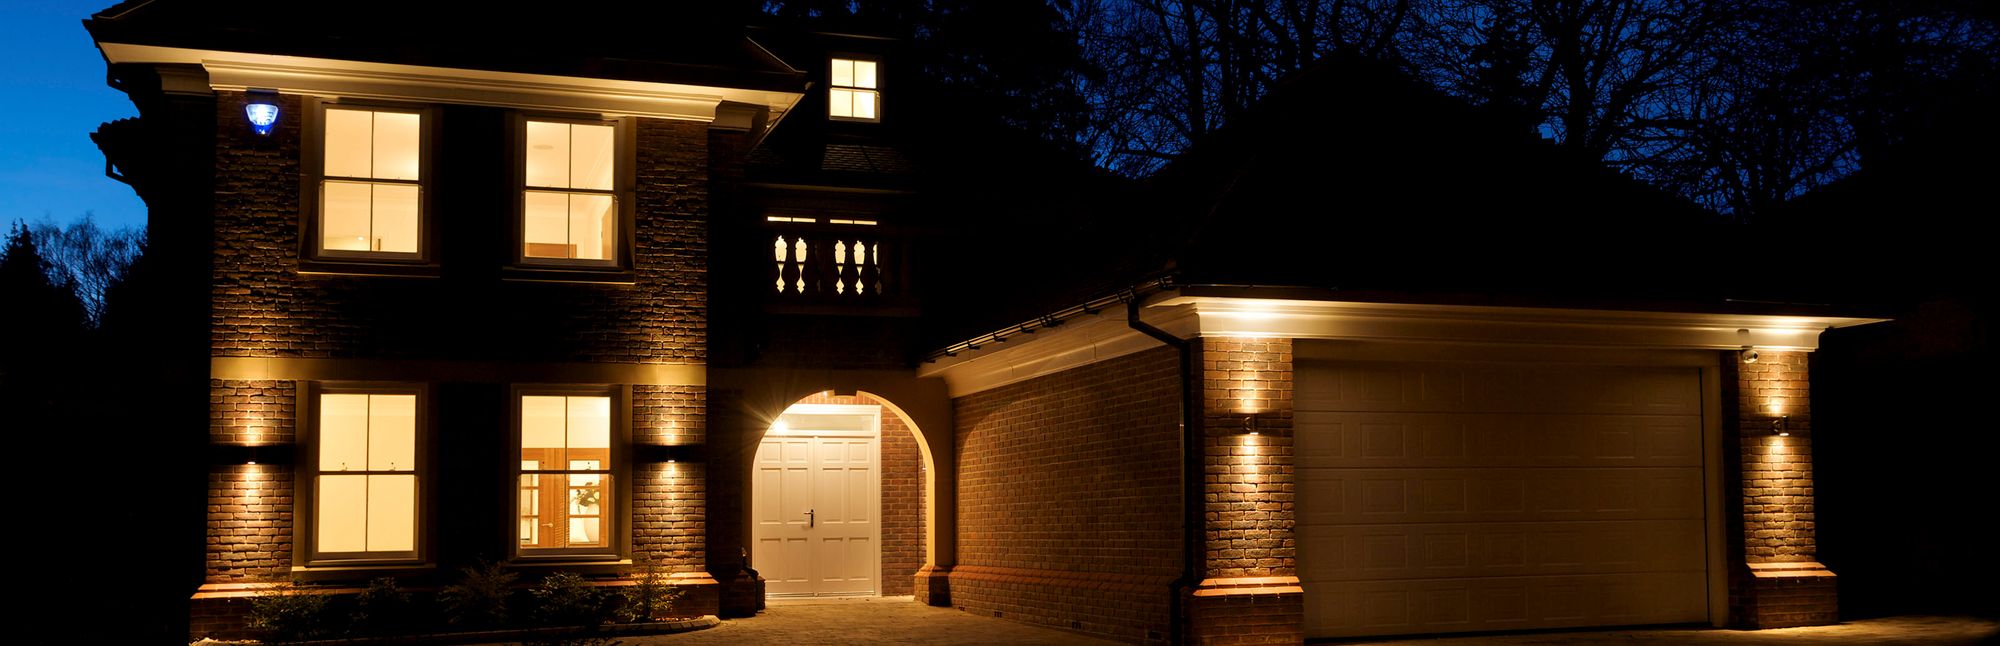 How to make your home more secure with outdoor security lights